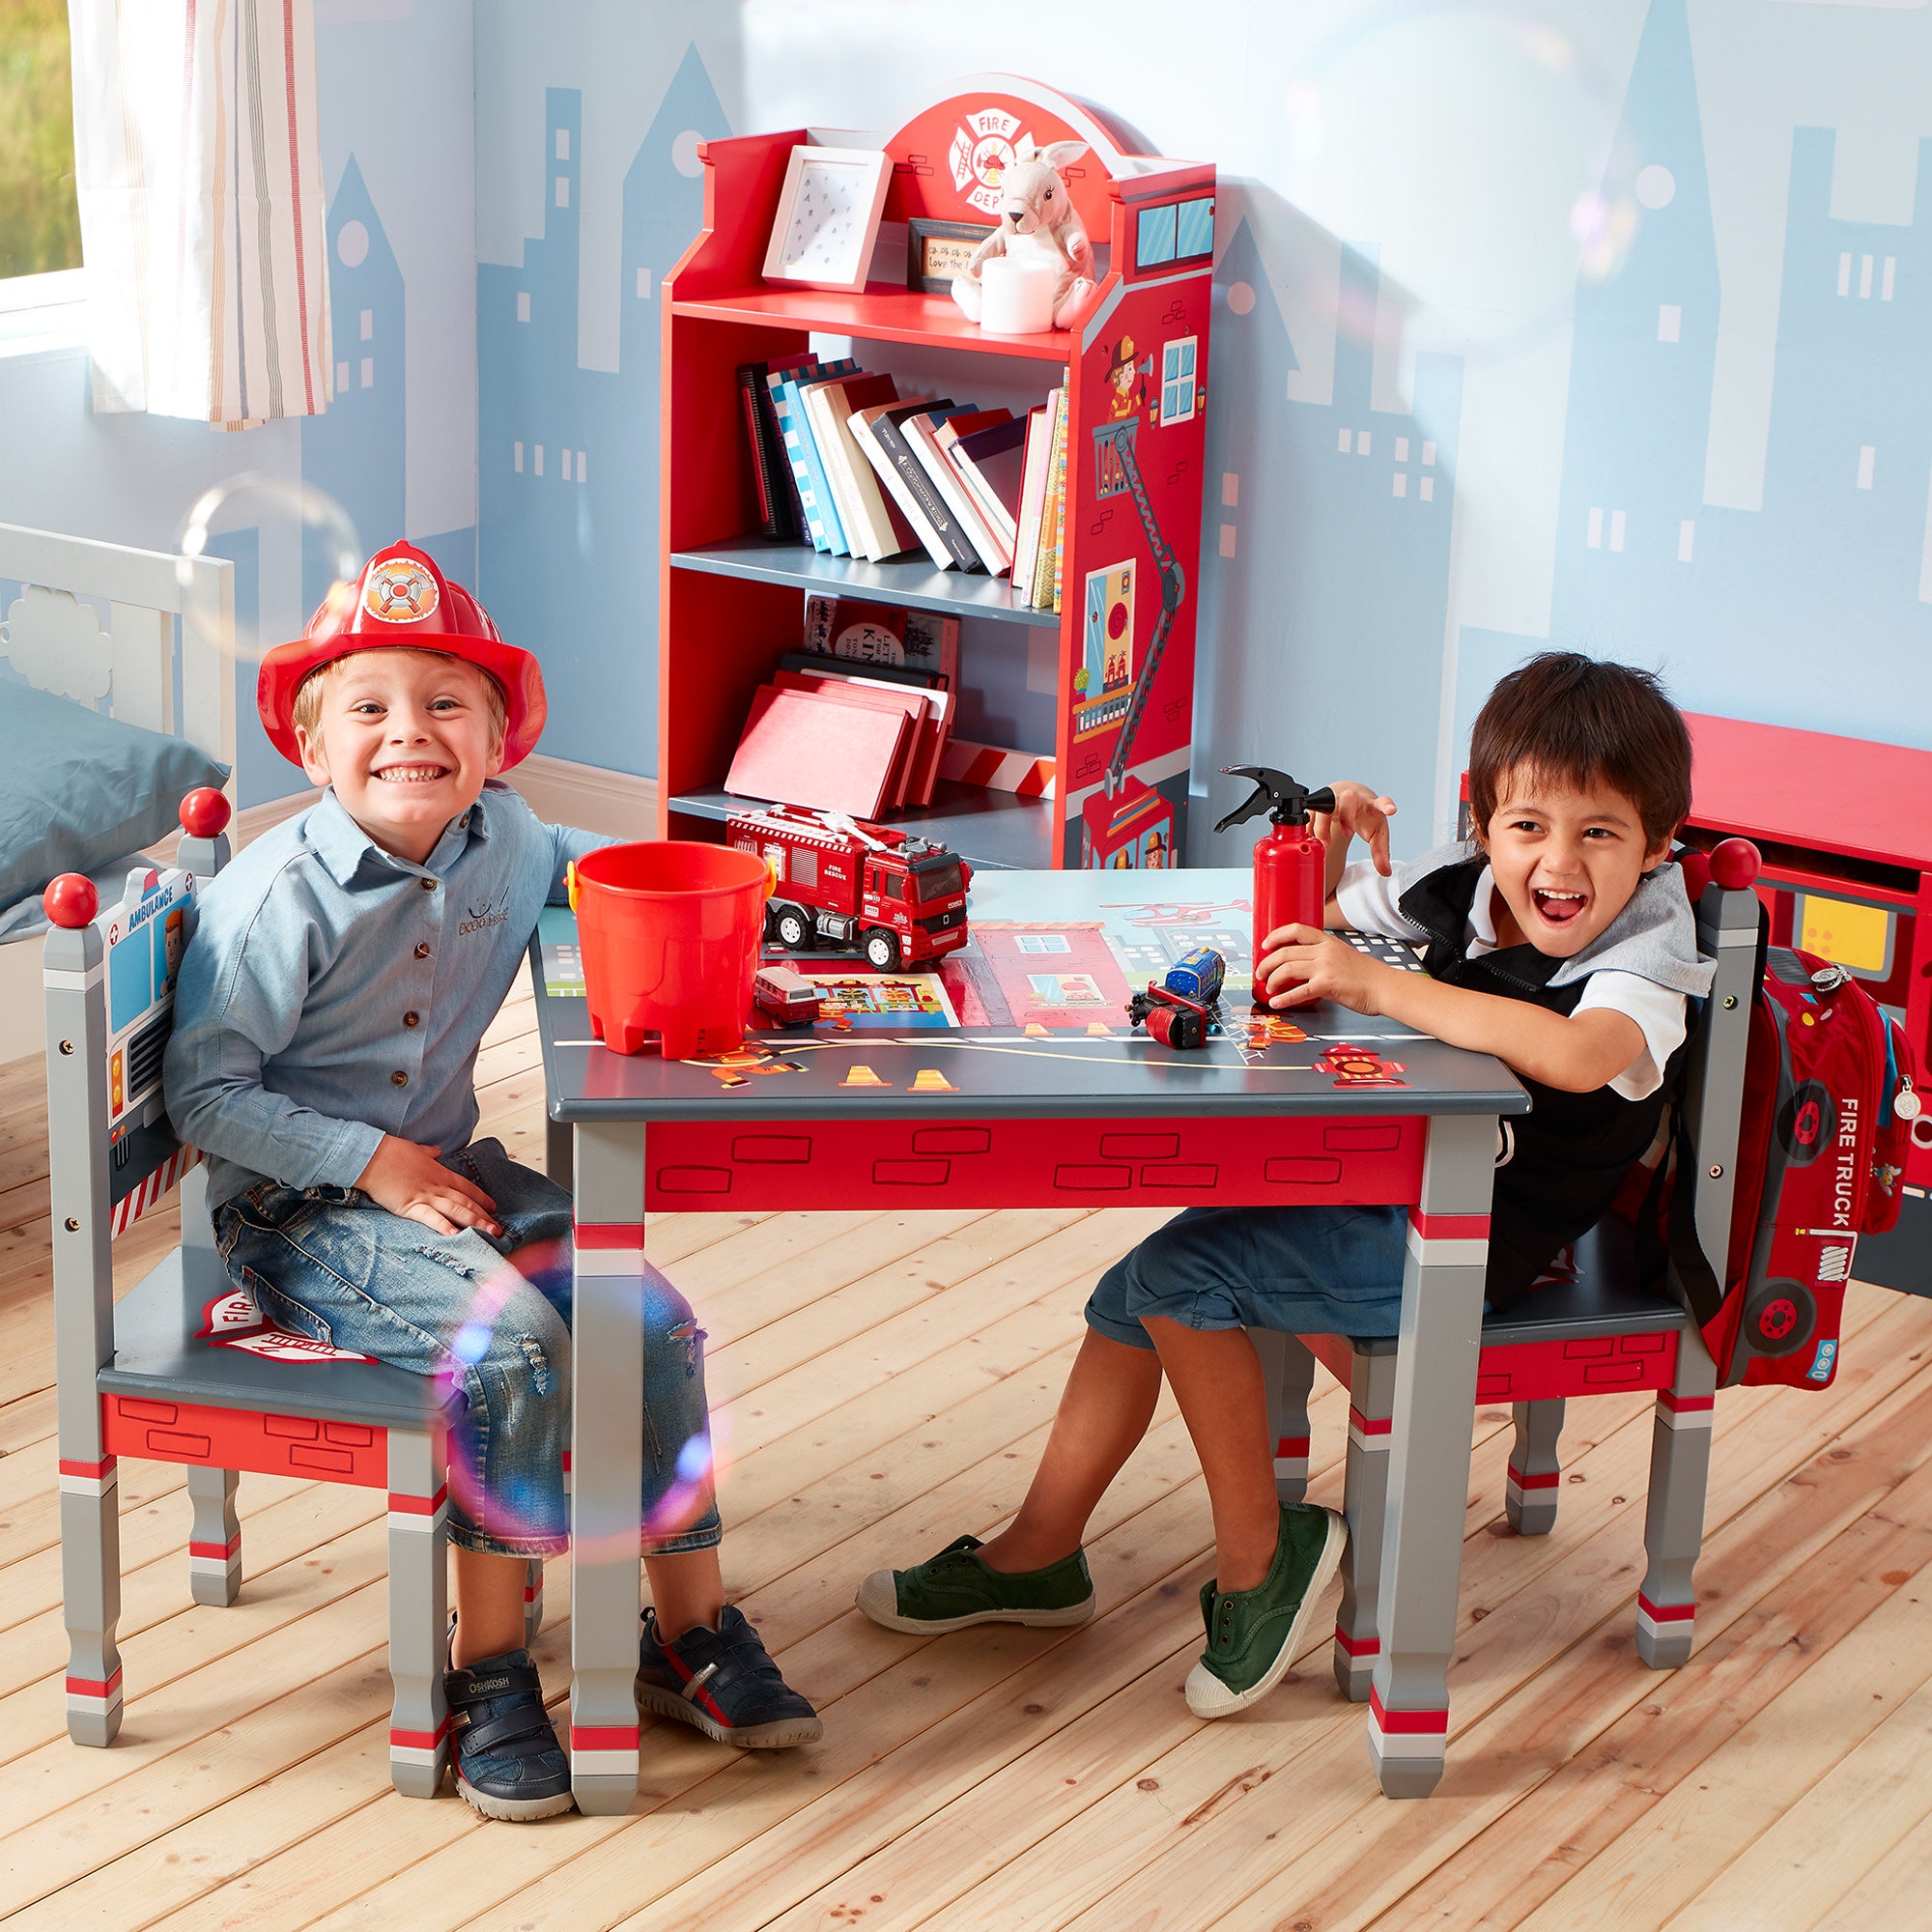 Fantasy Fields Wooden Kids Furniture Little Fire Fighters Table, Gray/Red